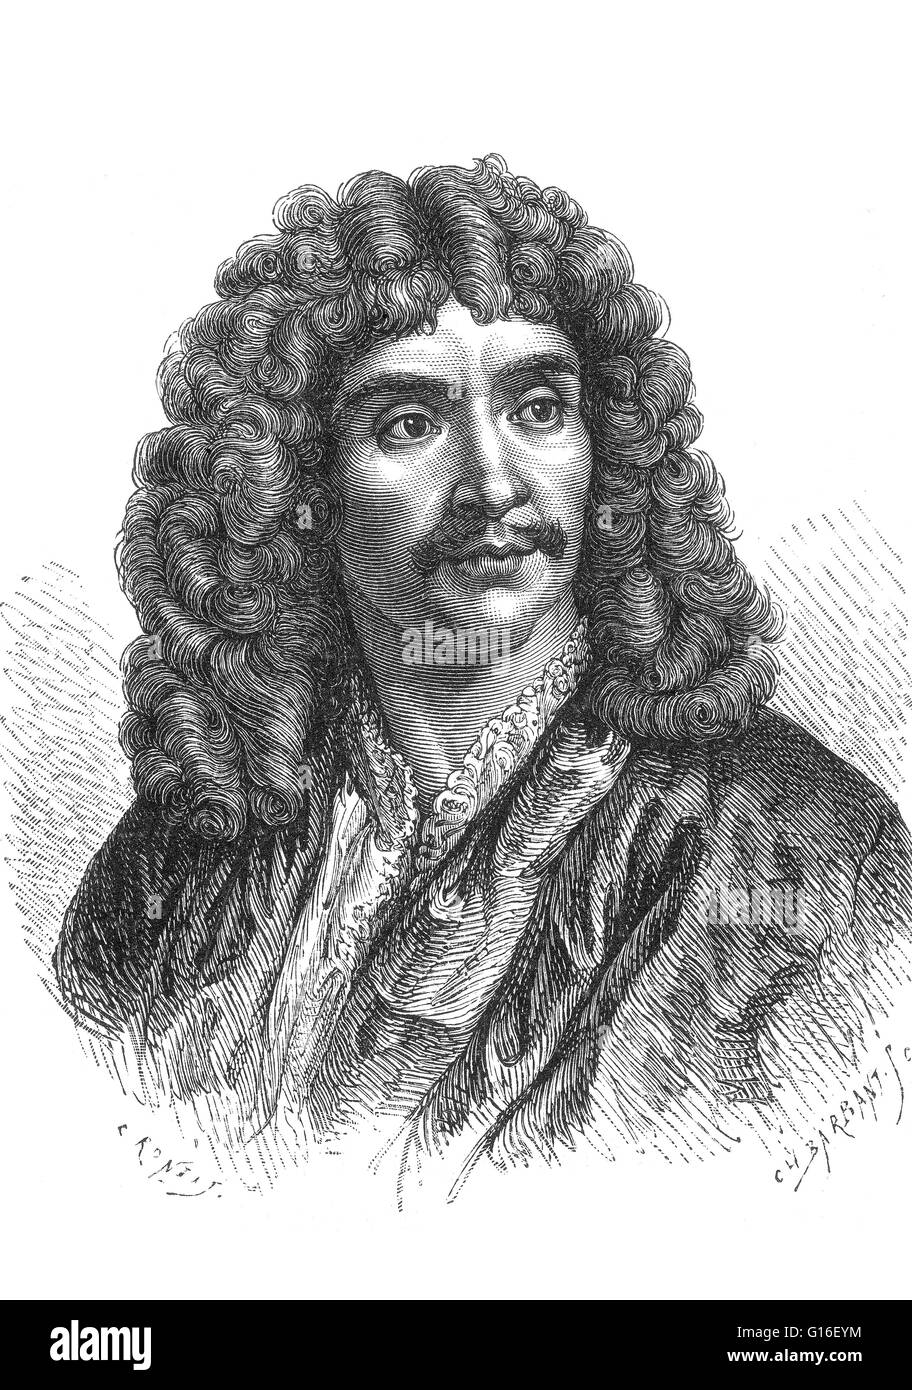 Jean-Baptiste Poquelin, known by his stage name Molière (January 15 ...